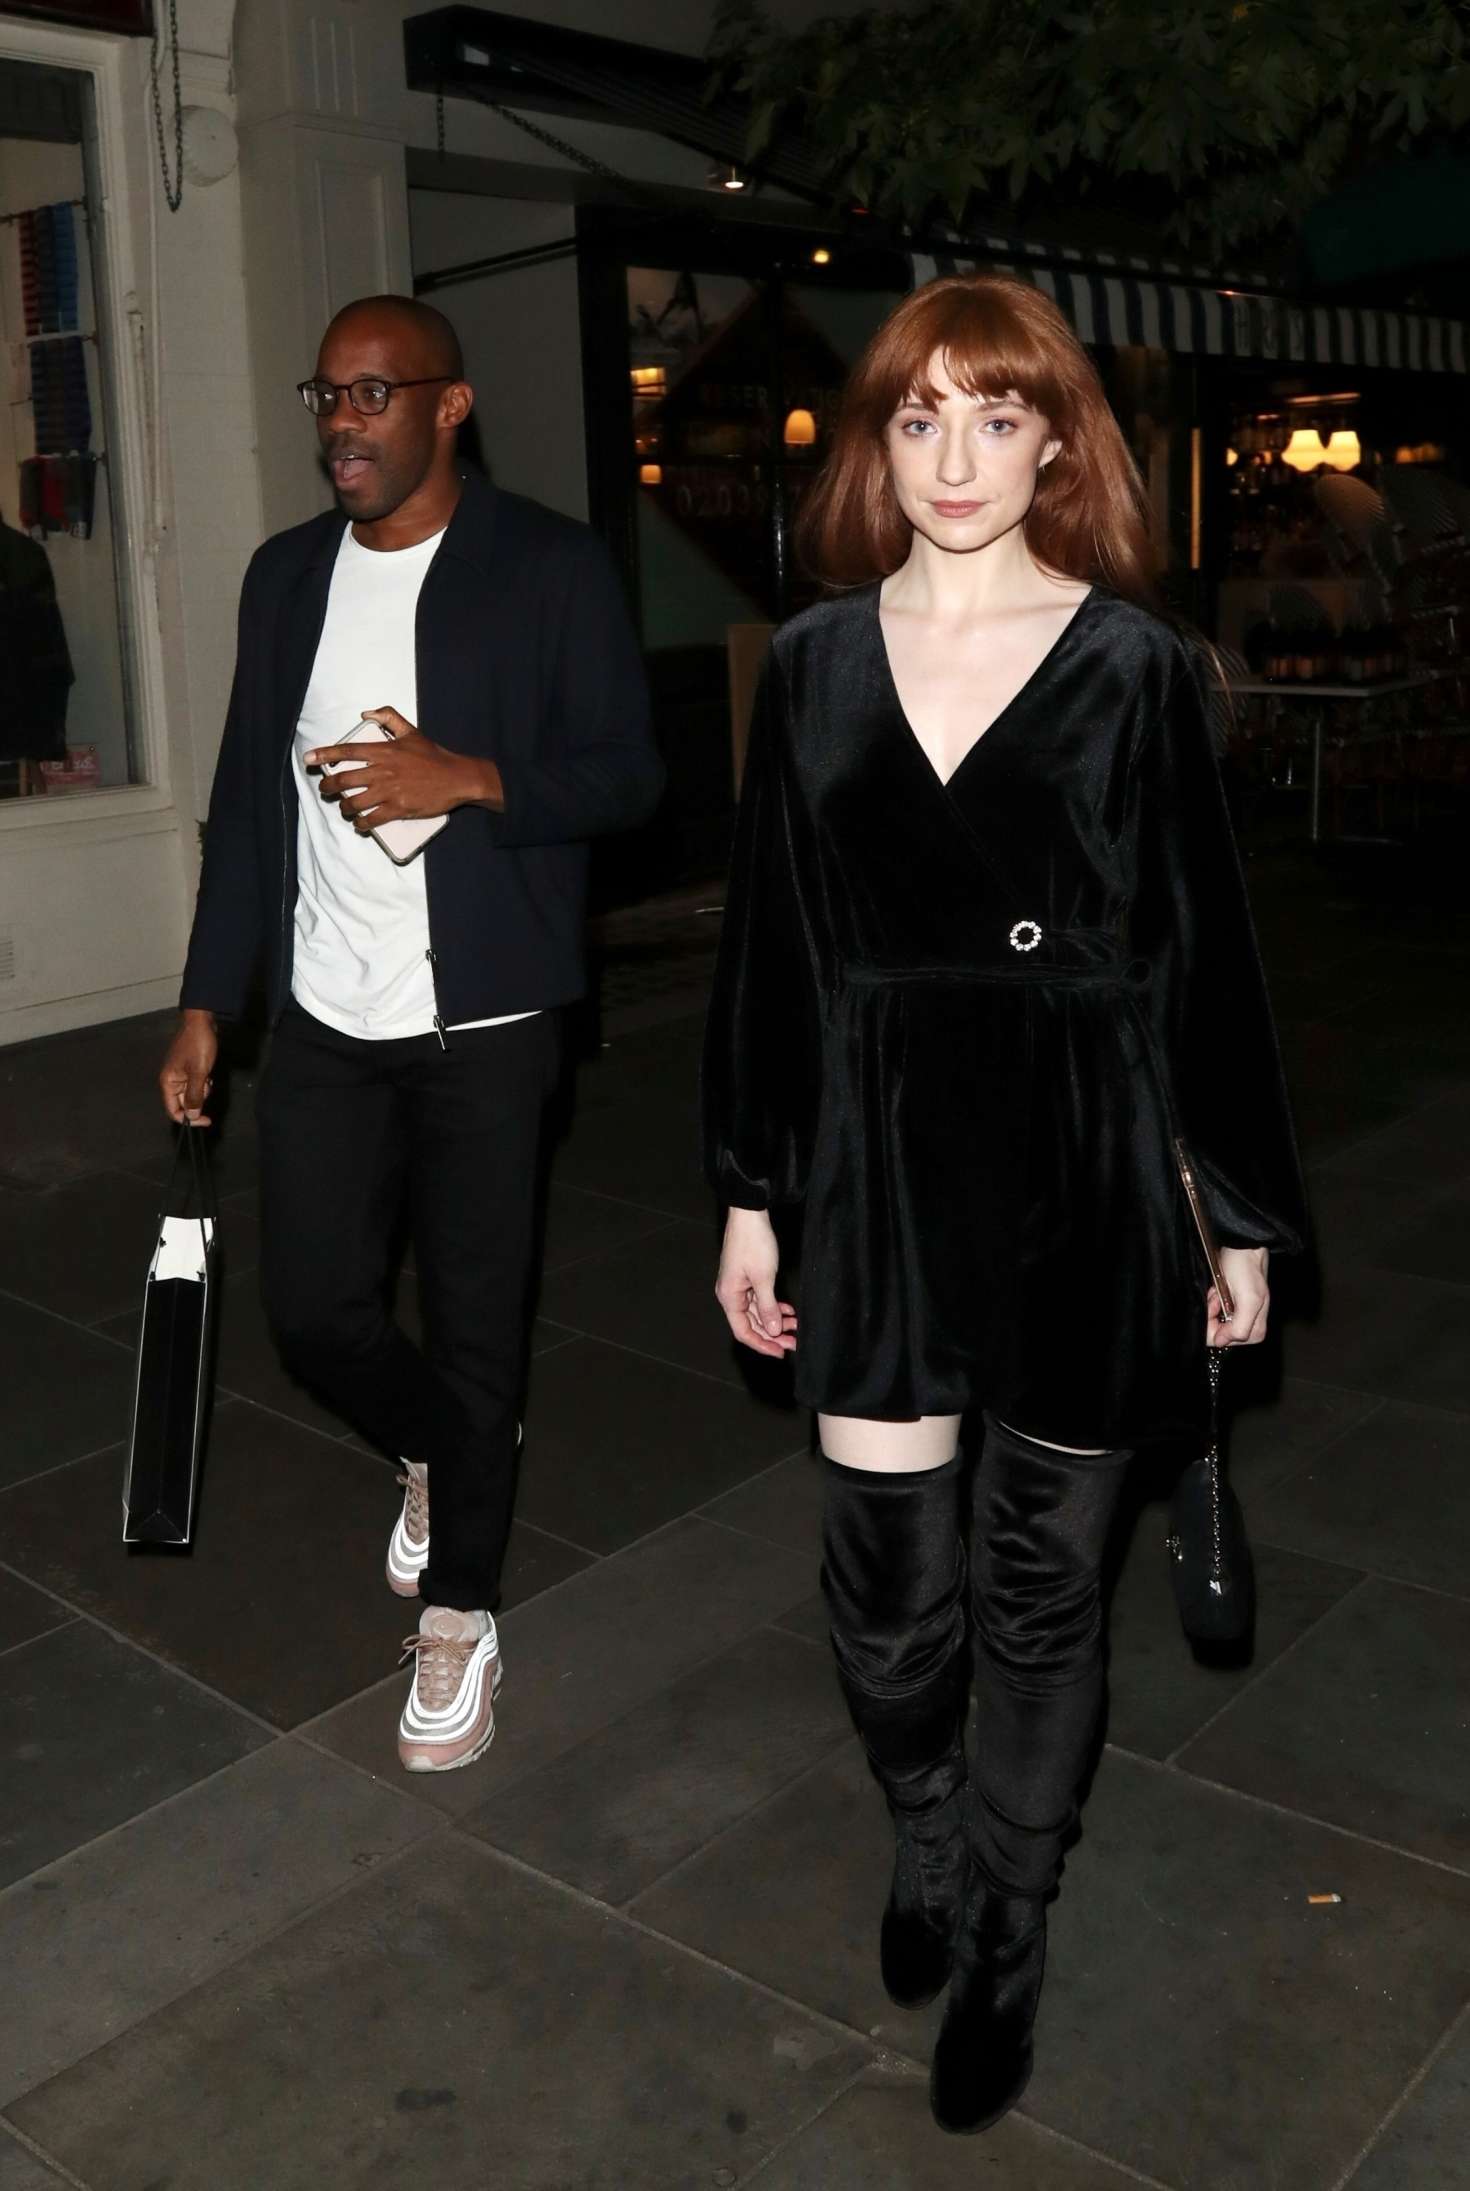 Nicola Roberts at the Harryâ€™s Bar launch in London